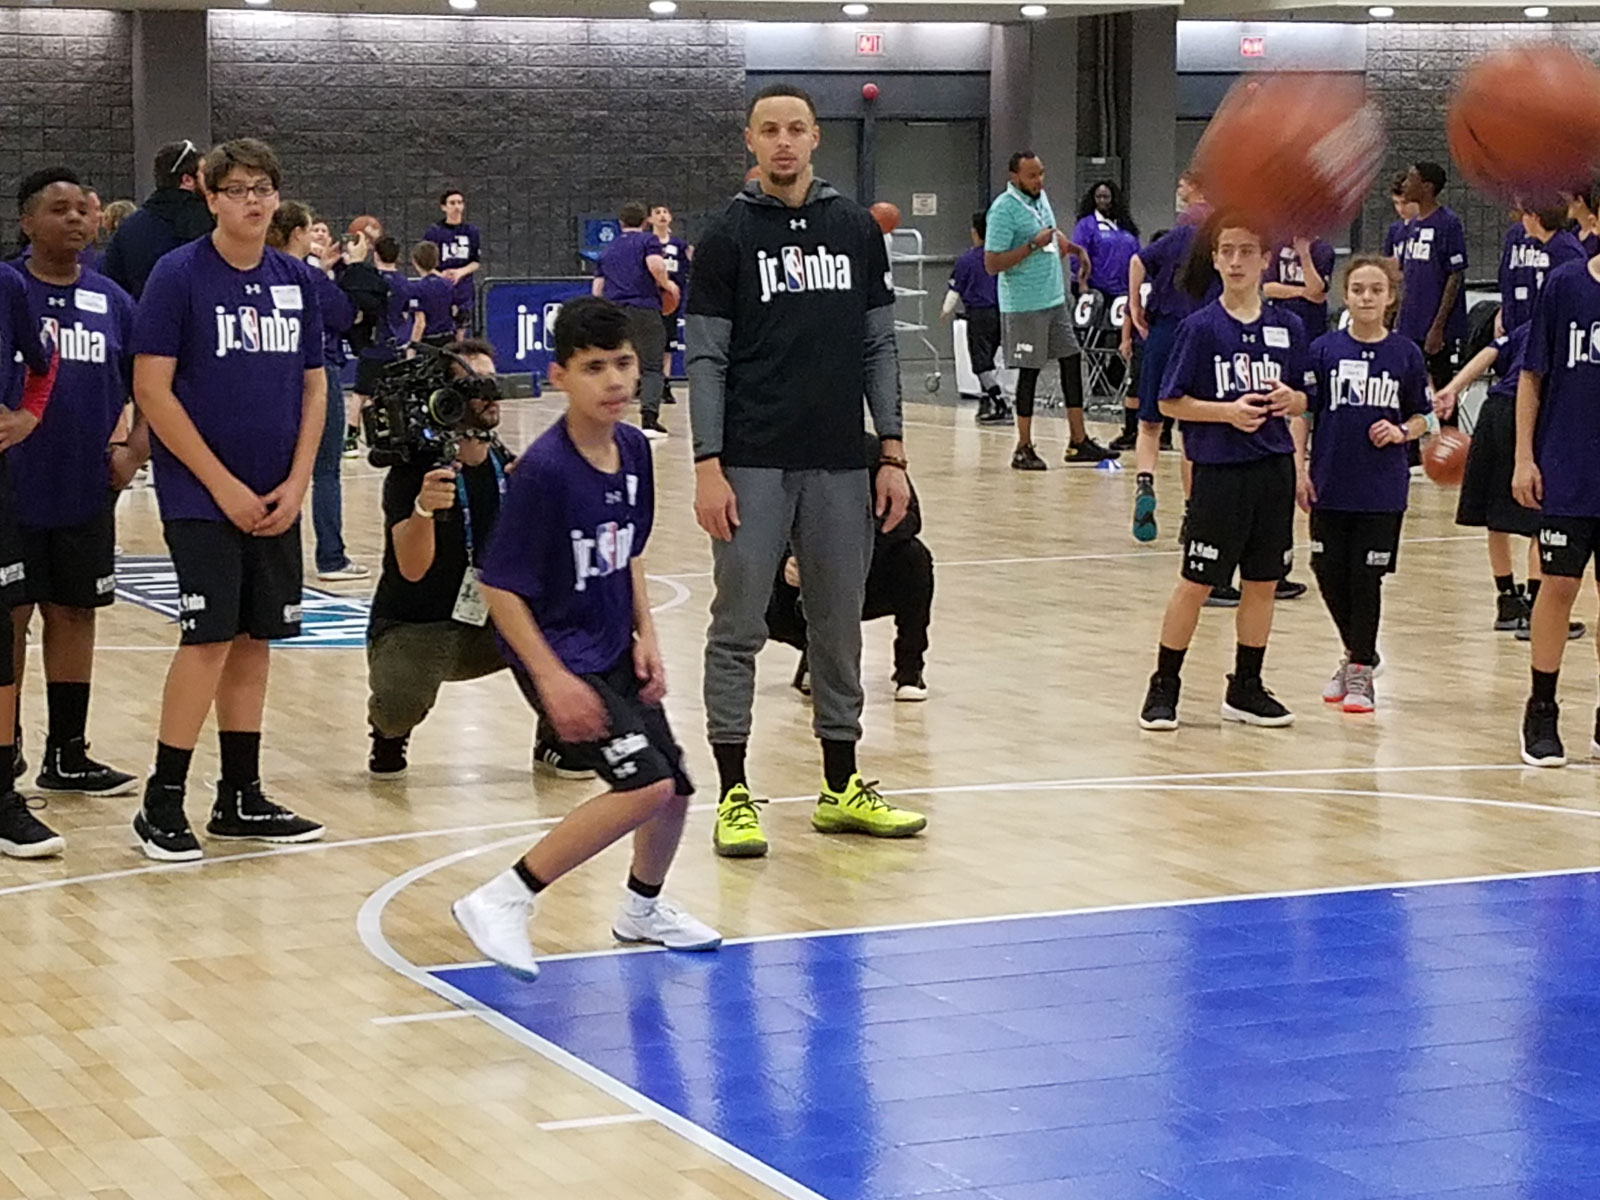 Stephen Curry at the Jr. NBA event